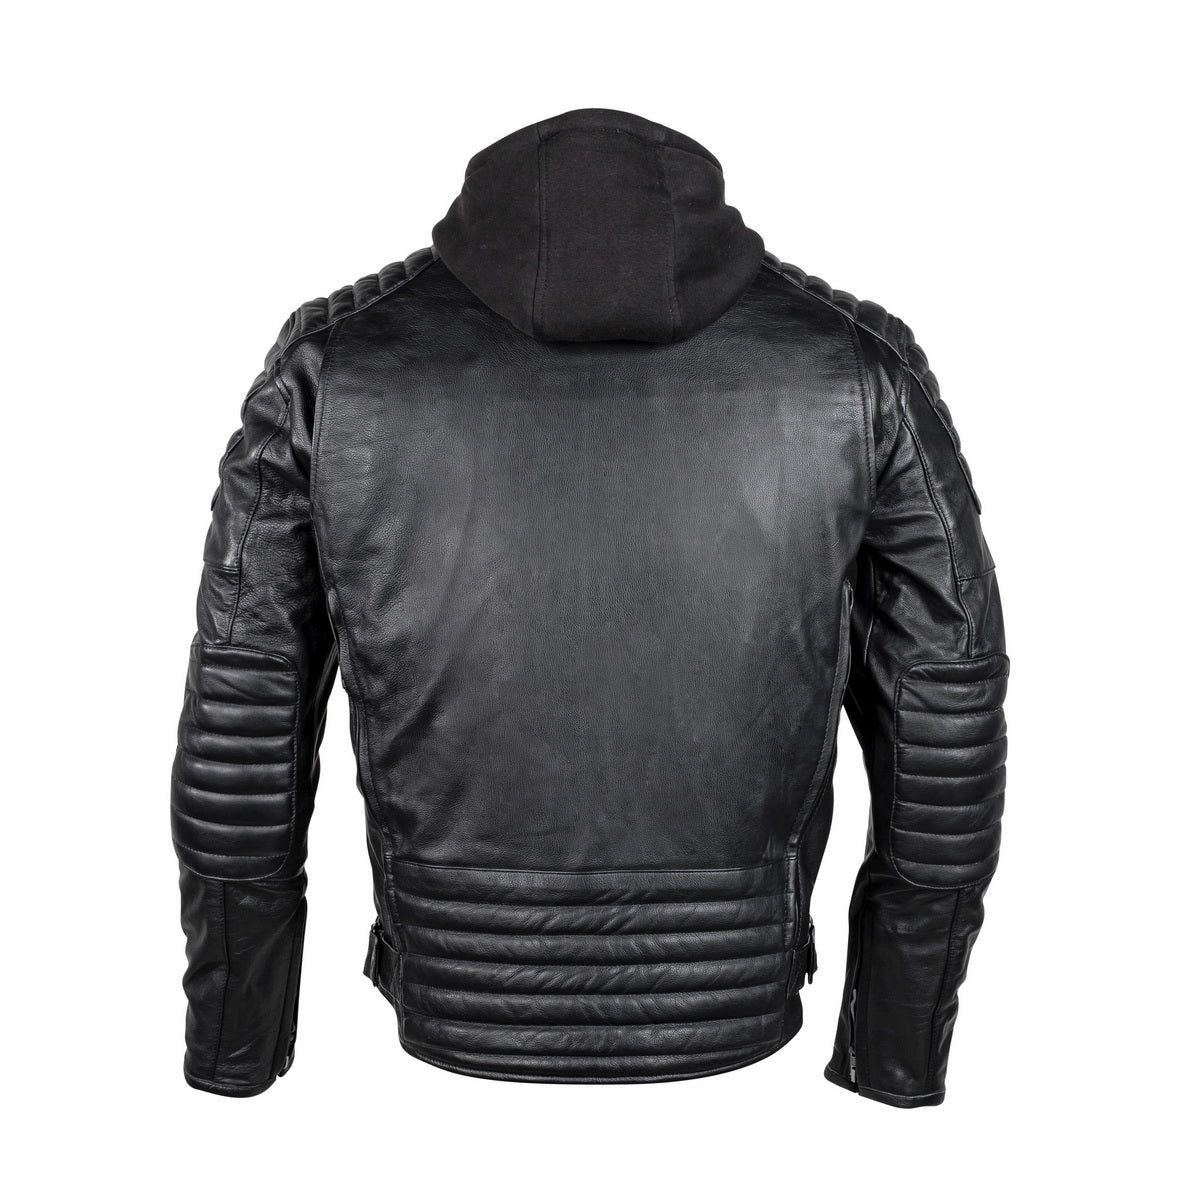 Cortech 'The Marquee' Mens Black Premium Leather Jacket with Removable Hoodie and SAS-TEC Armor